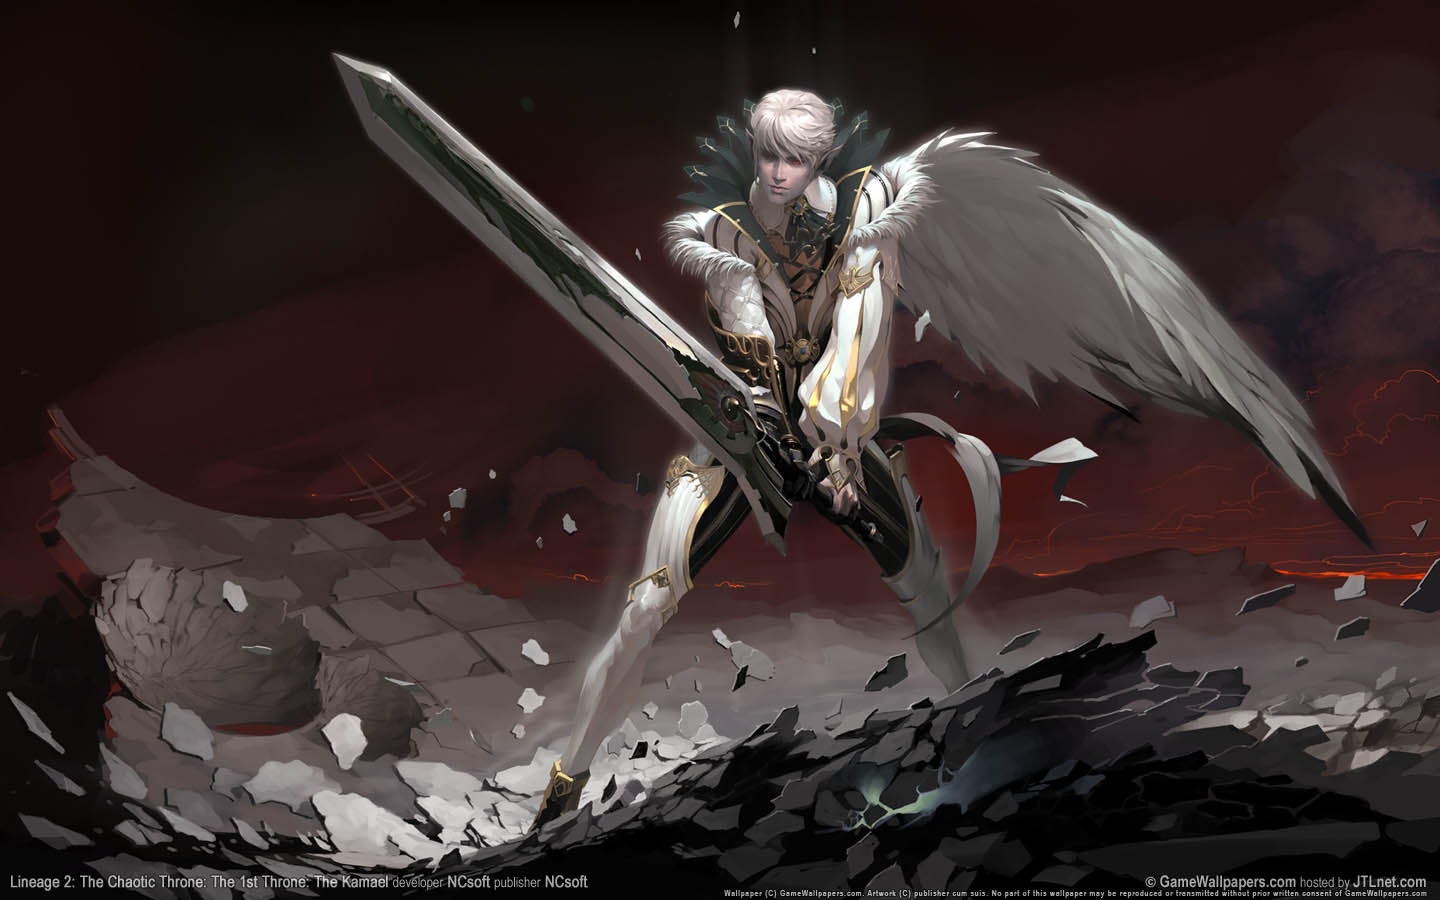 Lineage 2: The Chaotic Throne: The 1st Throne: The Kamael wallpaper 01 1440x900